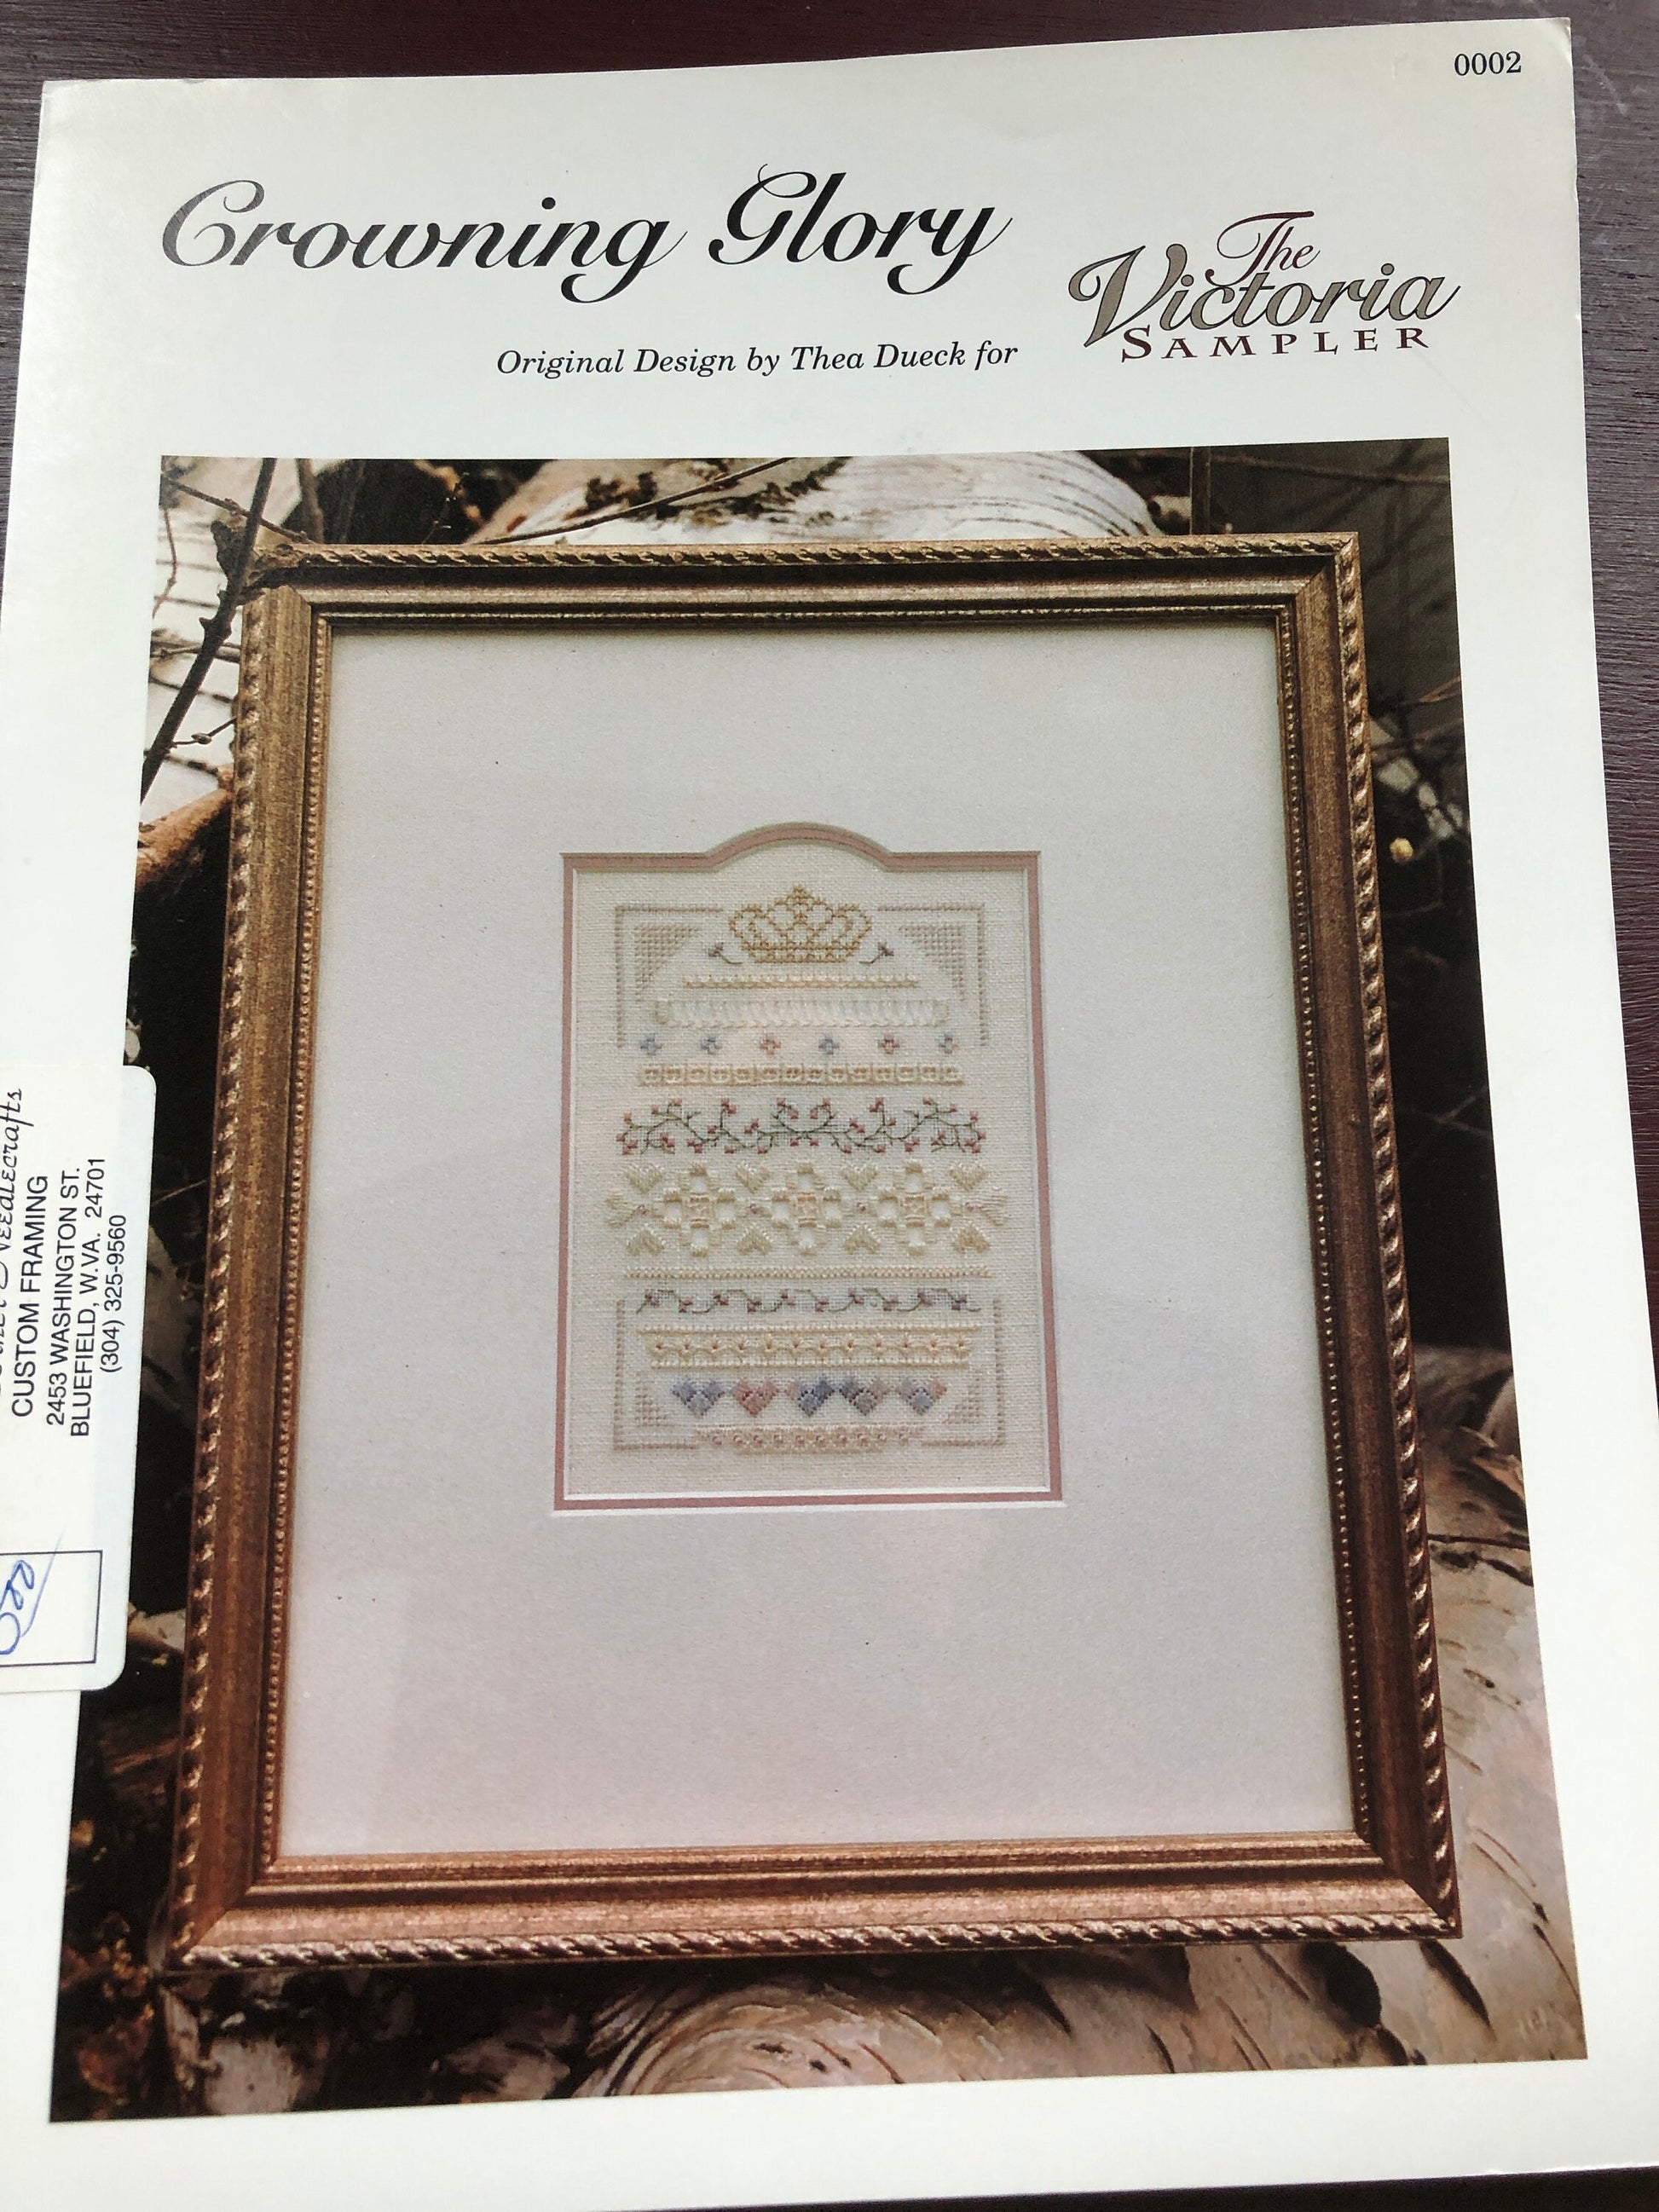 The Victoria Sampler, Antique Lace & Crowning Glory, Set of 2, Design by Thea Dueck, Vintage 1993*